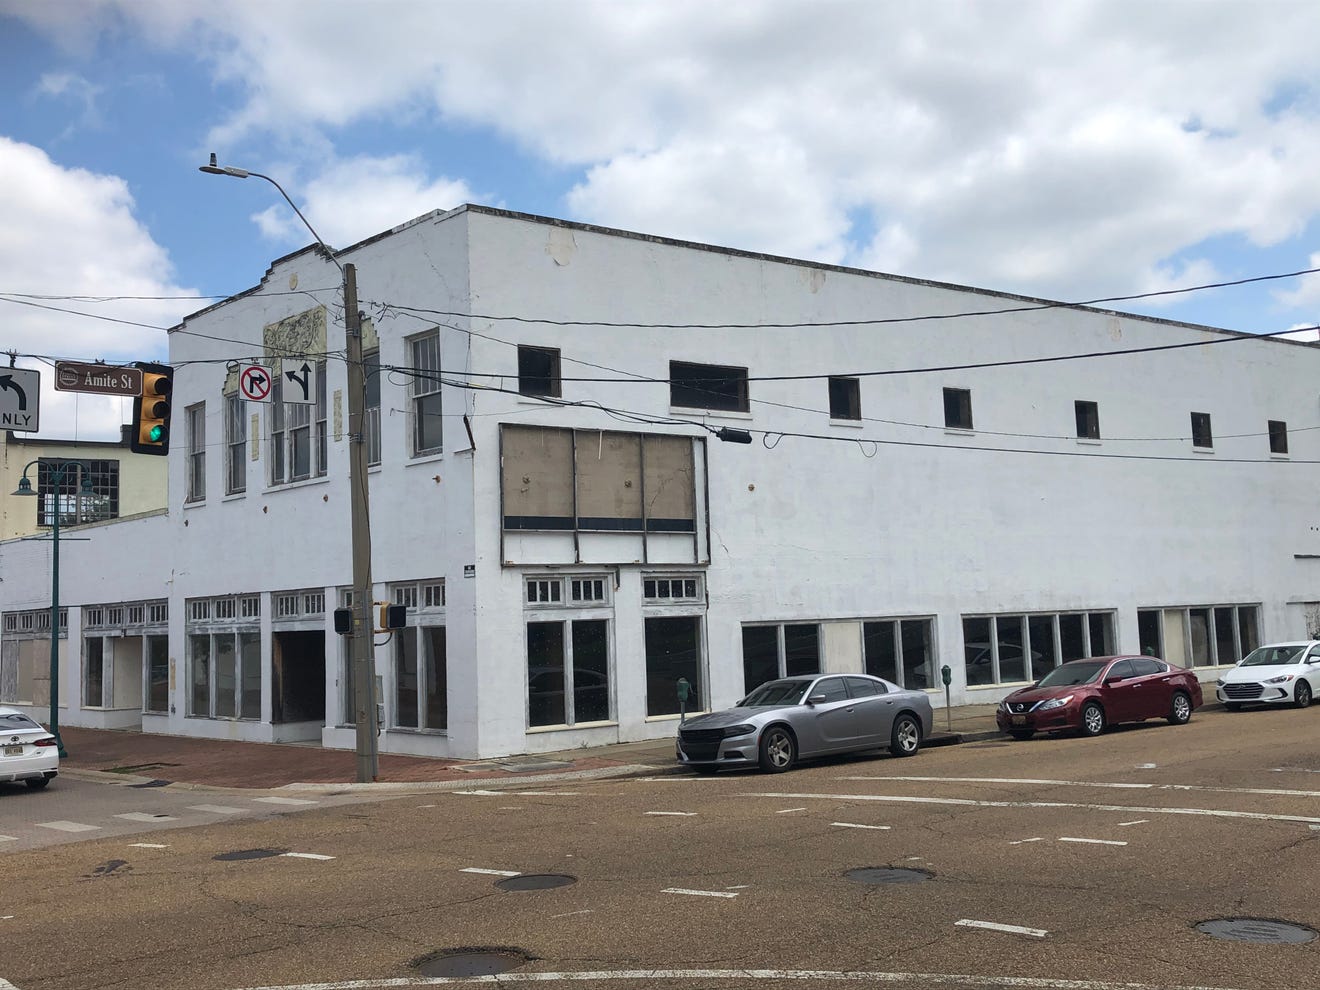 Plan for Farish Street Property Could Bring Culinary Food Hall To Historic District